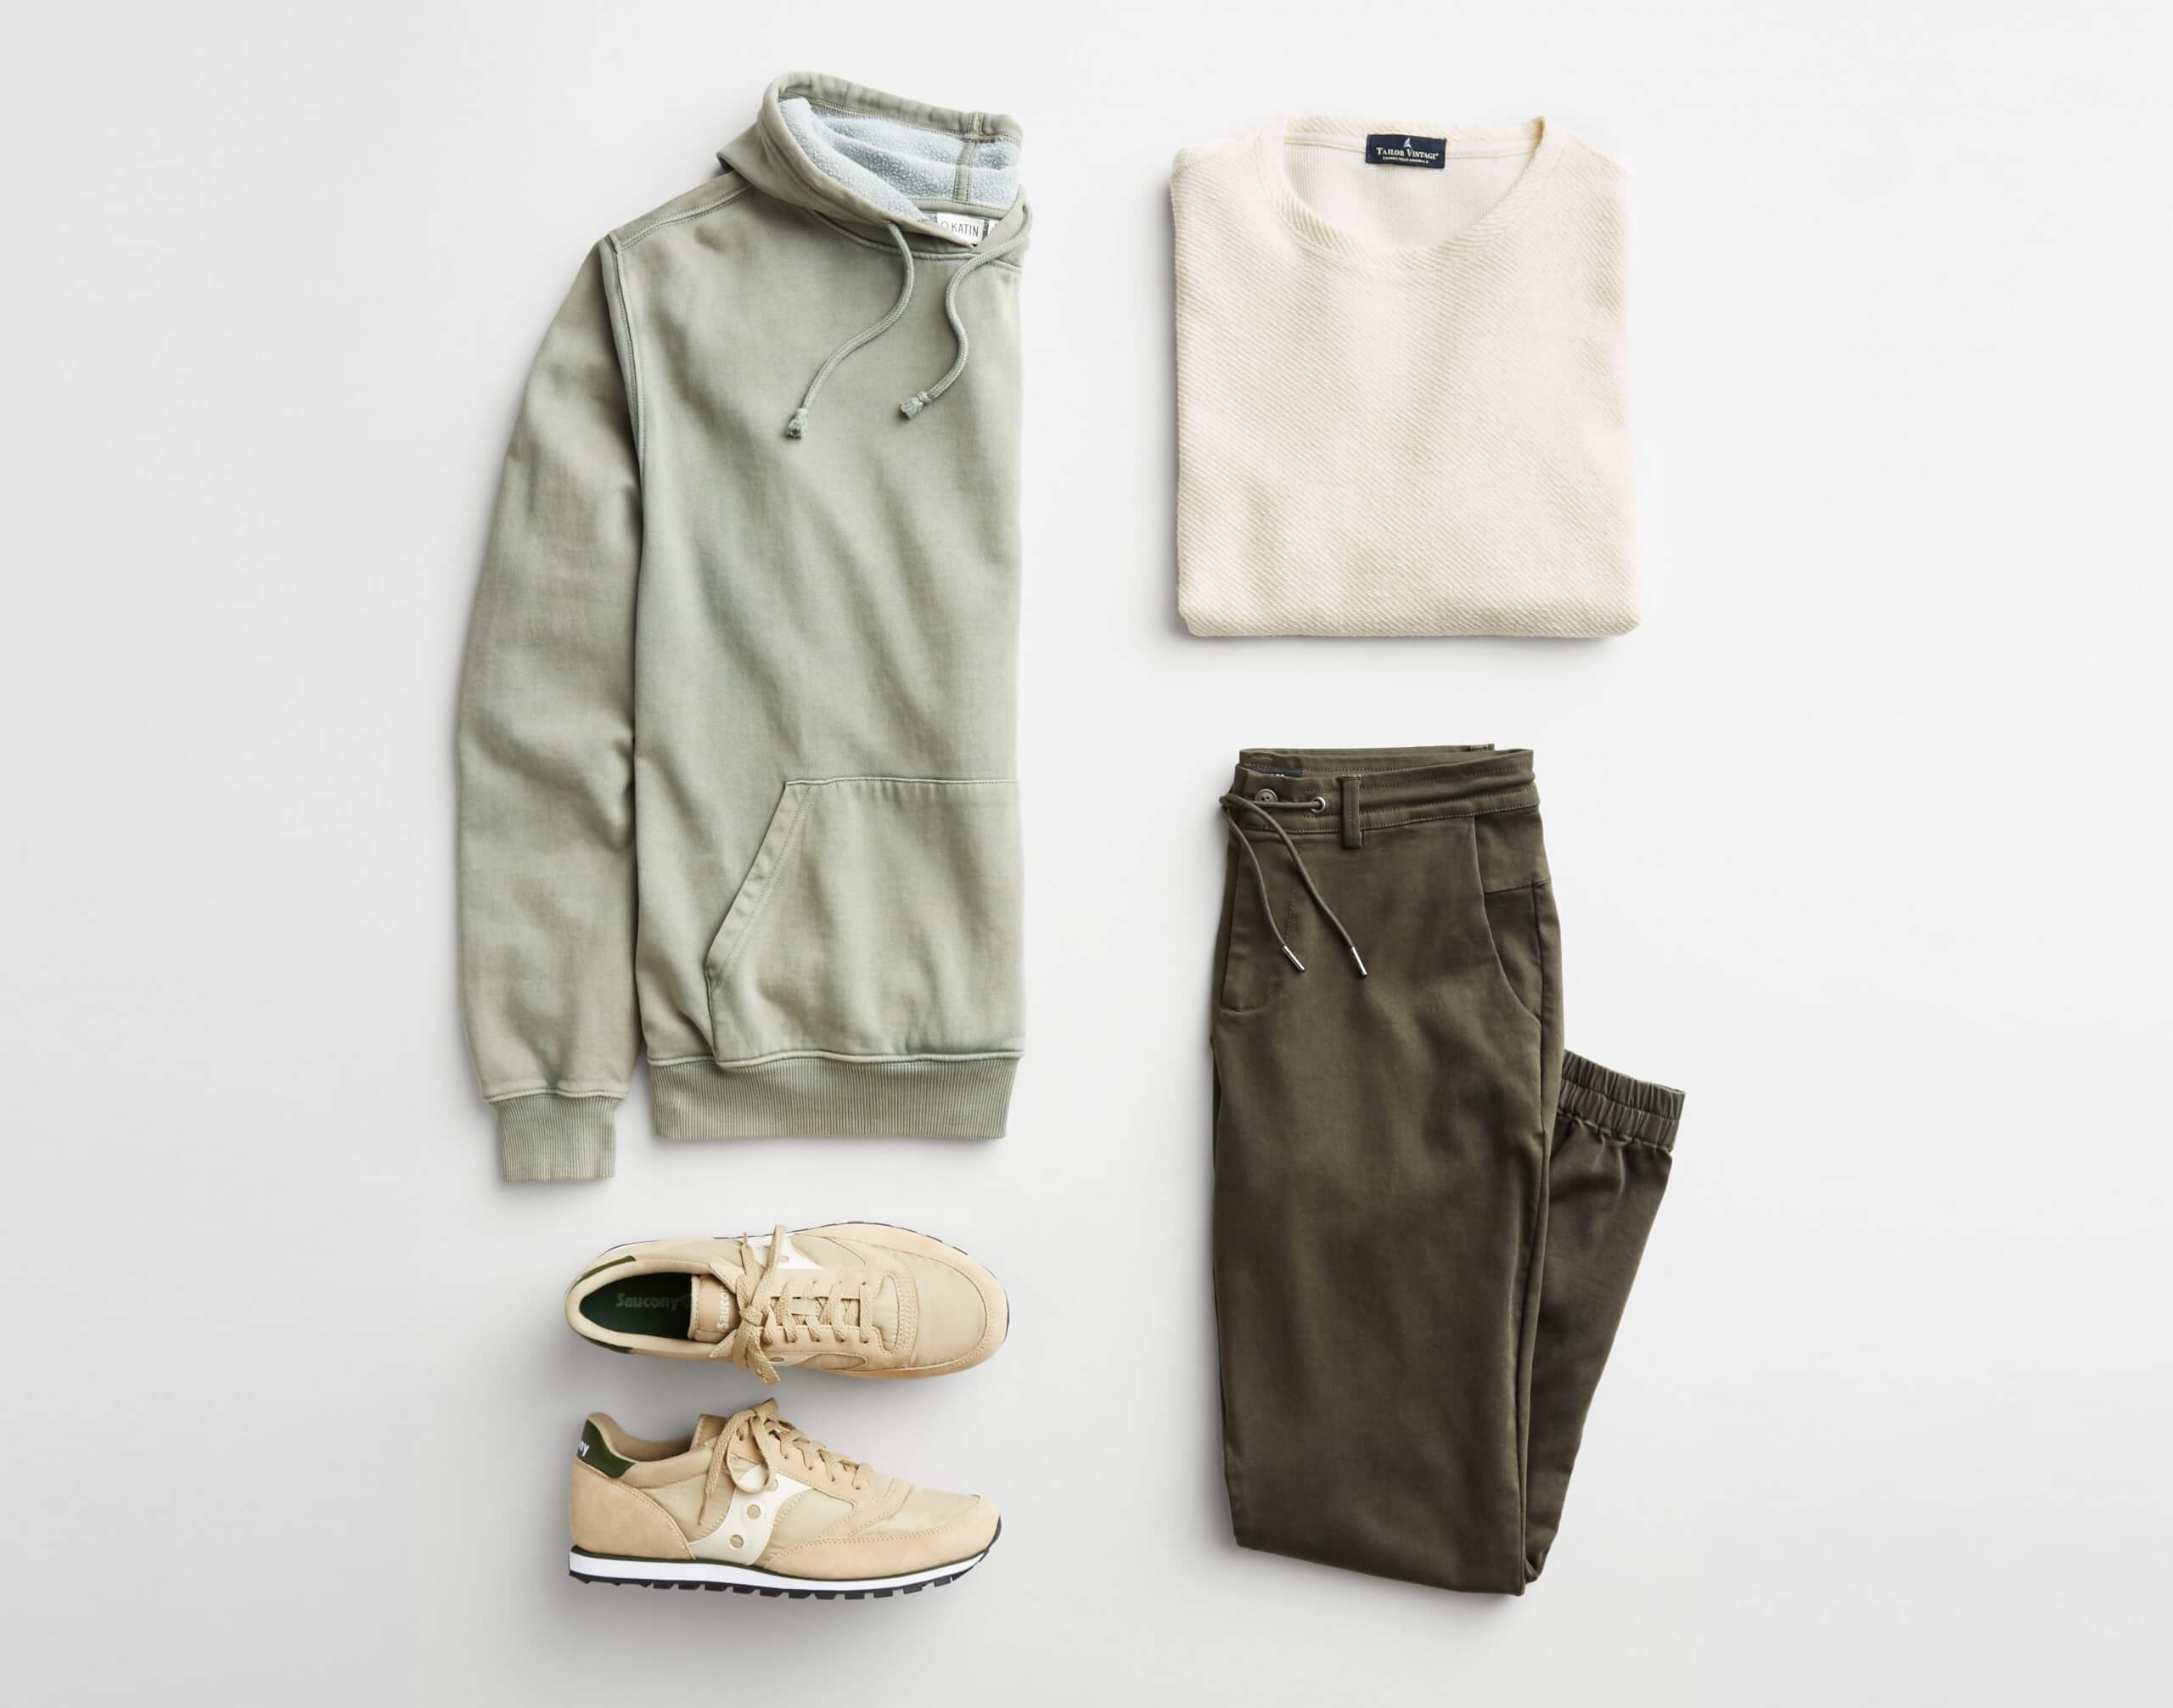 Men's Street Style Guide | Personal Styling | Stitch Fix